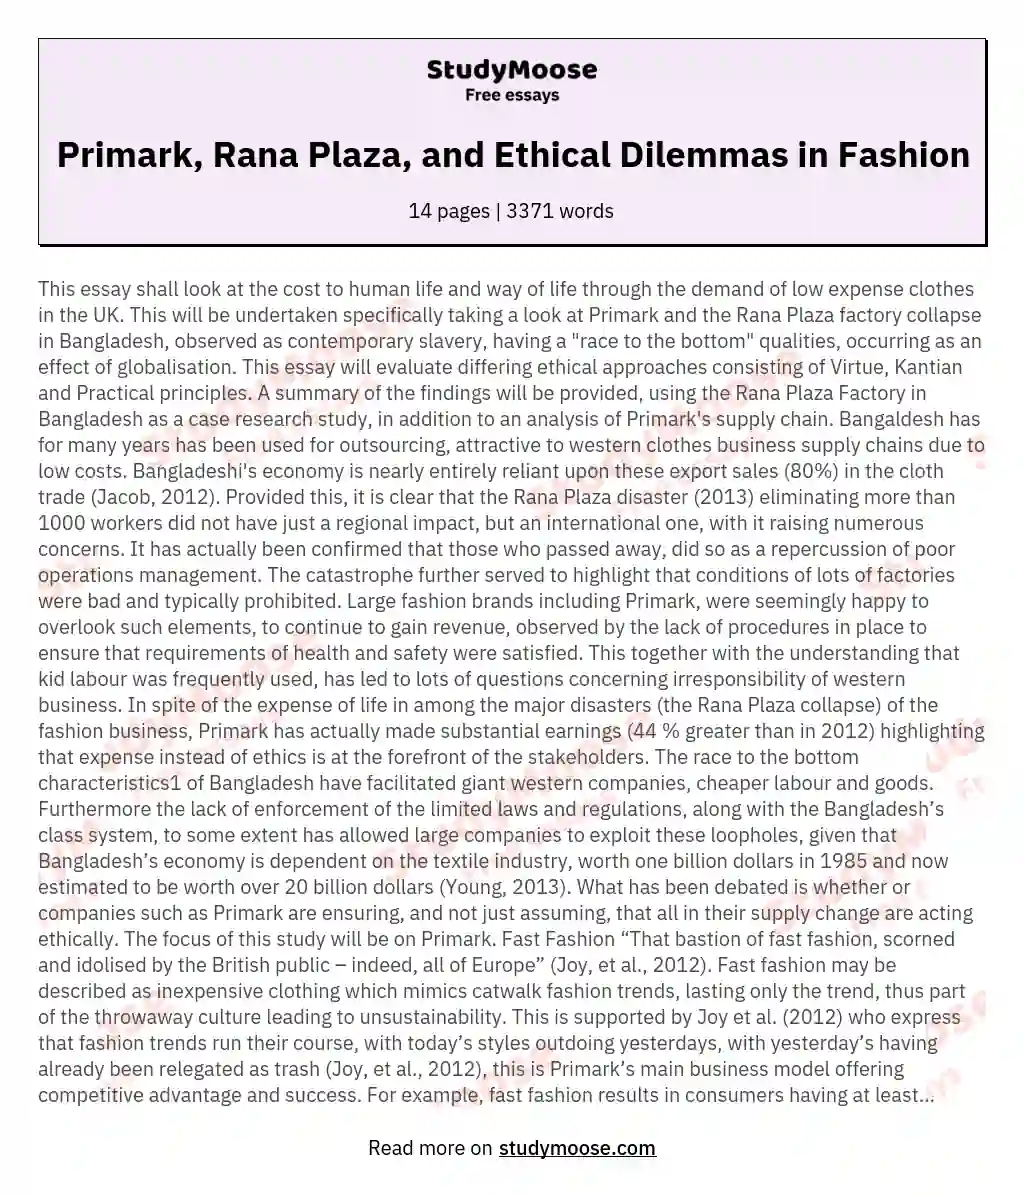 Primark, Rana Plaza, and Ethical Dilemmas in Fashion essay